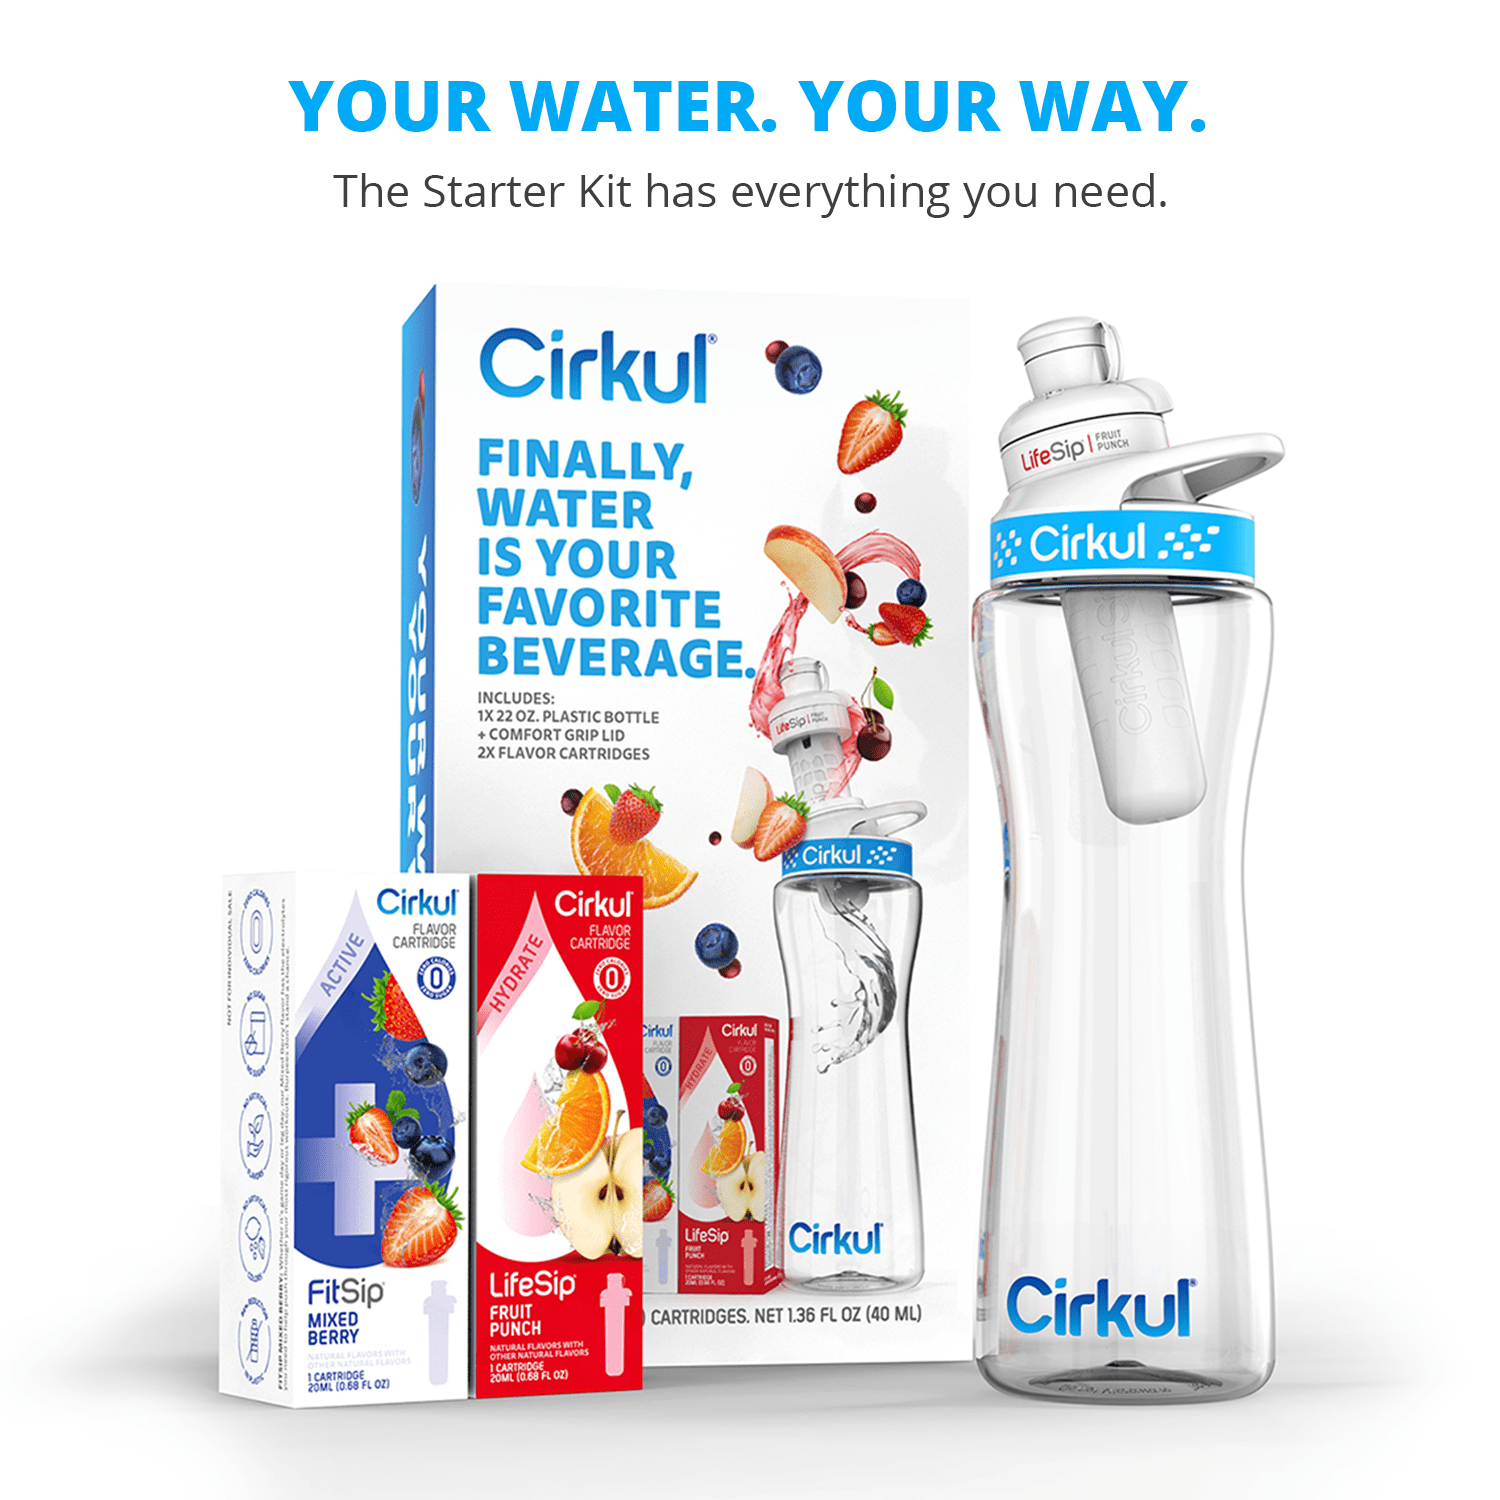 How to Use Cirkul Water Bottle